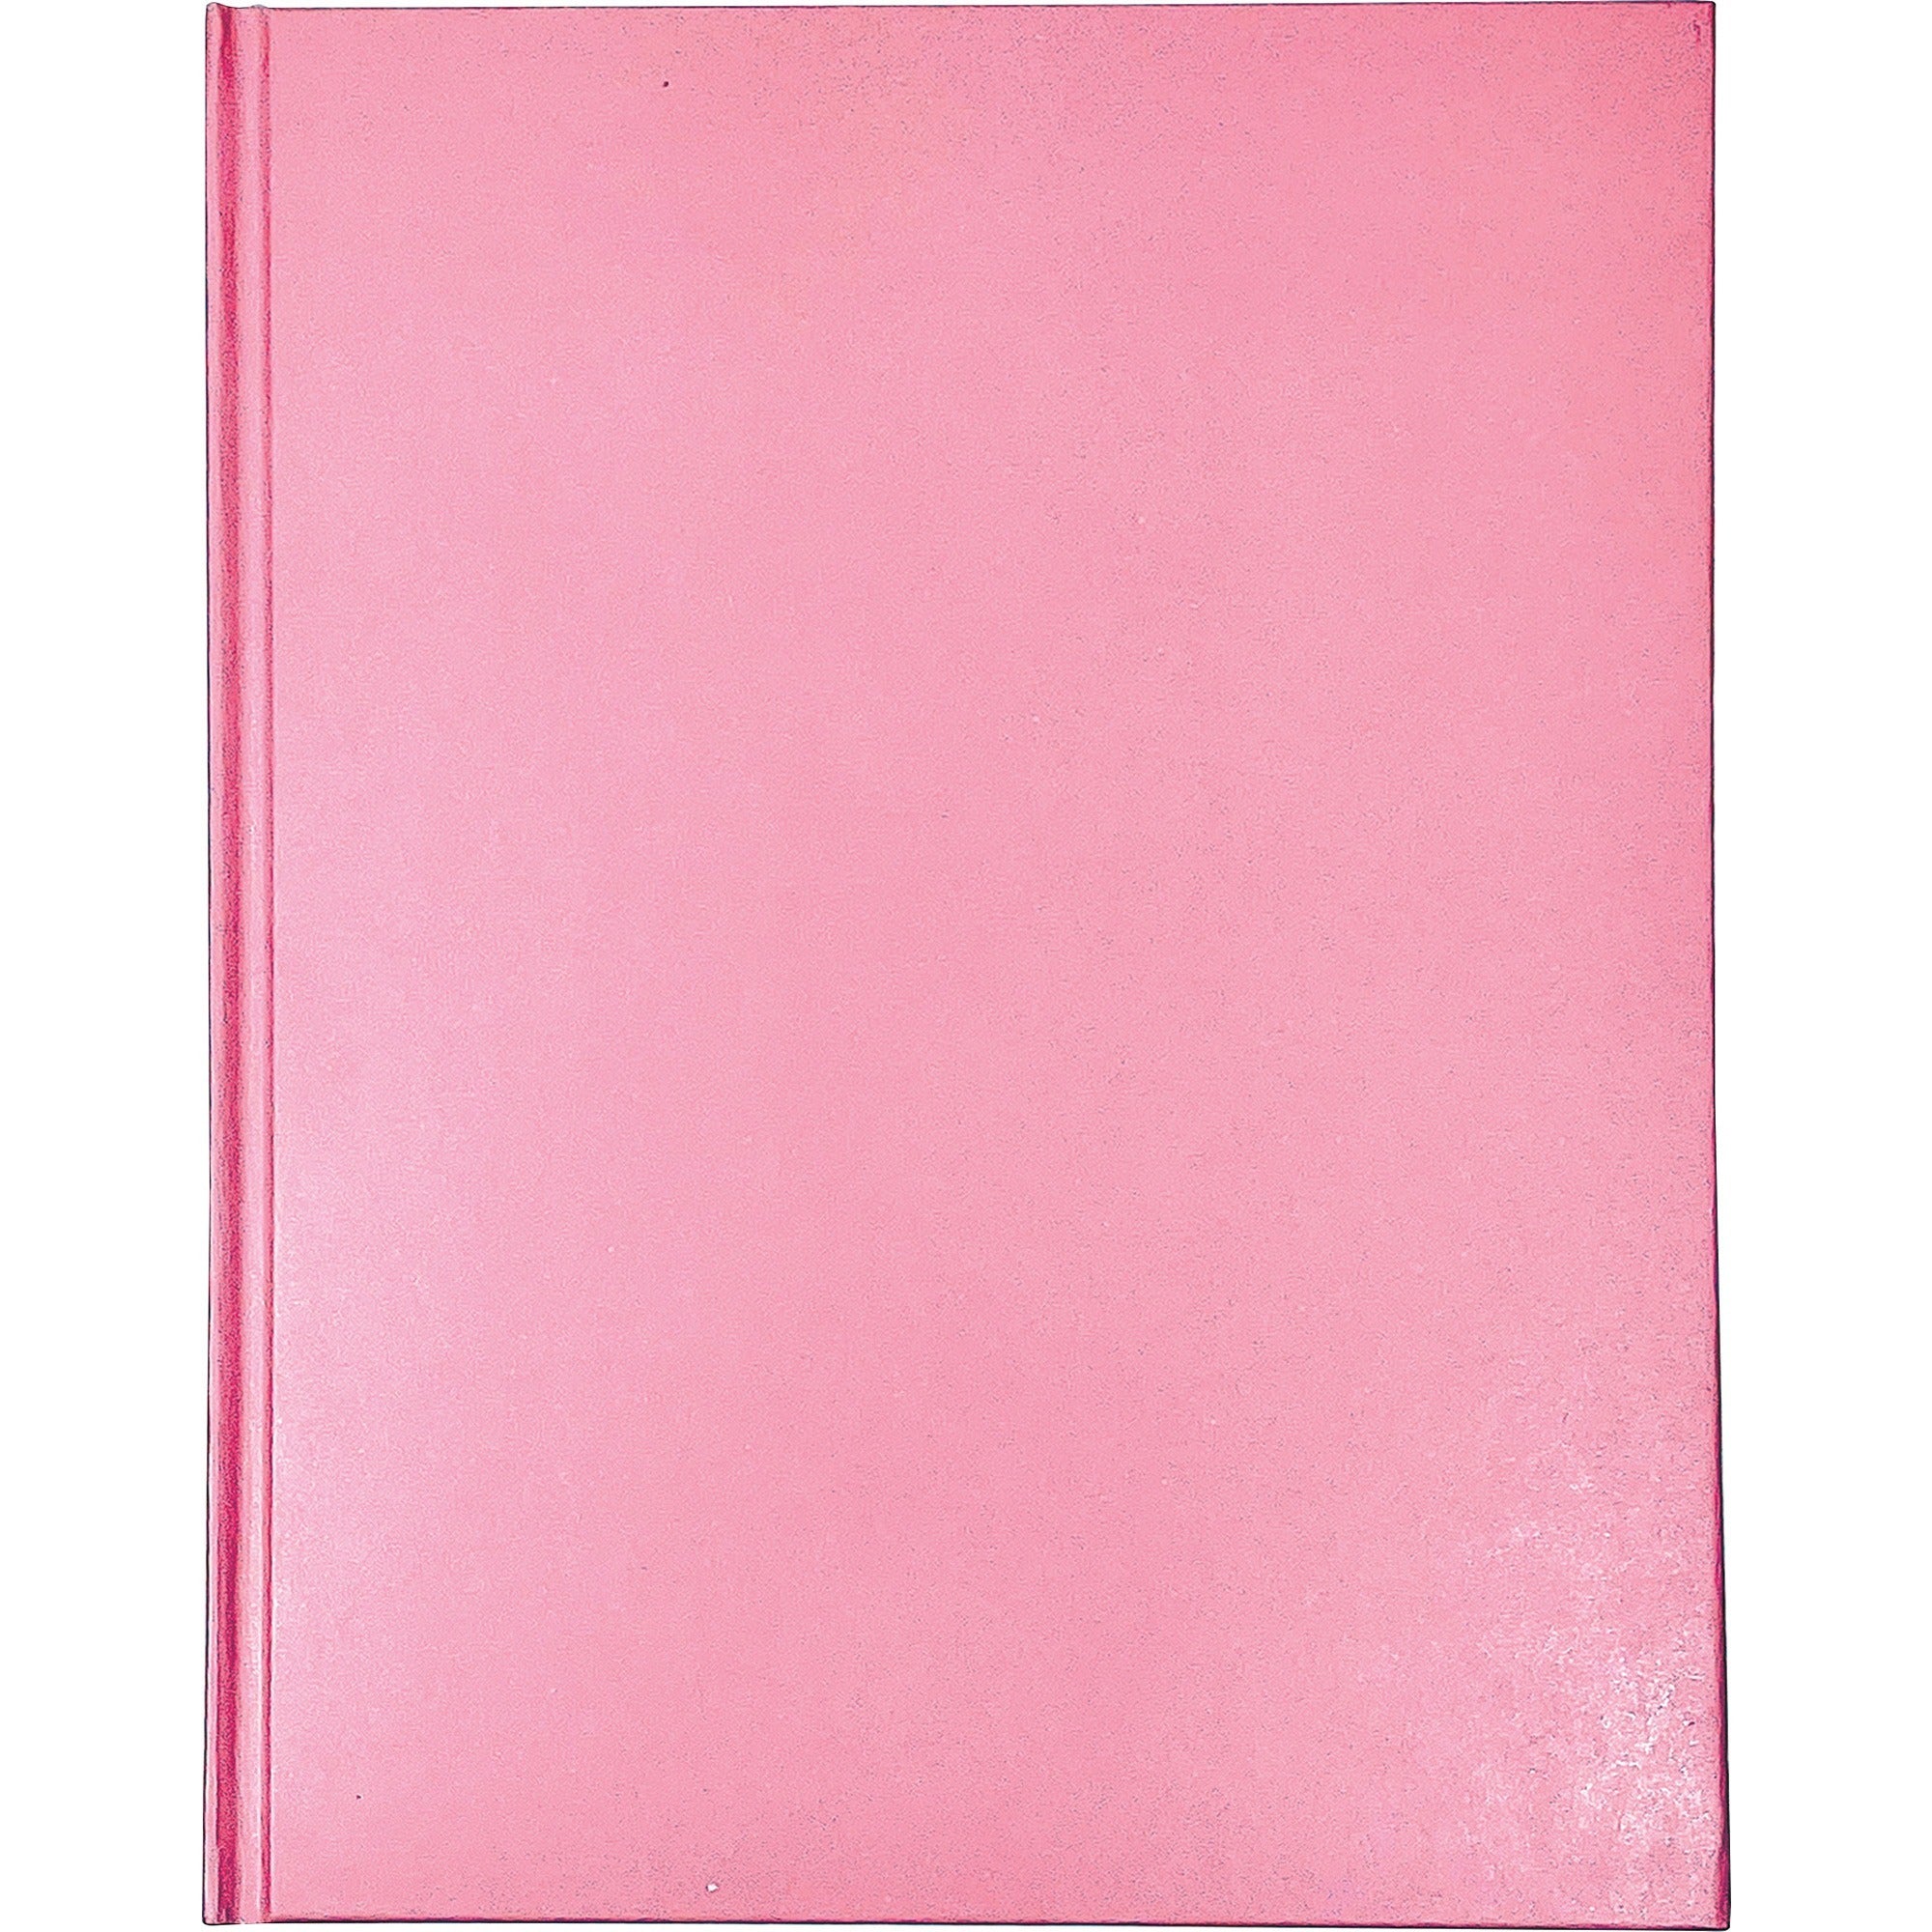 ashley-hardcover-blank-book-28-pages-letter-8-1-2-x-11-pink-cover-hard-cover-durable-1-each_ash10715 - 2